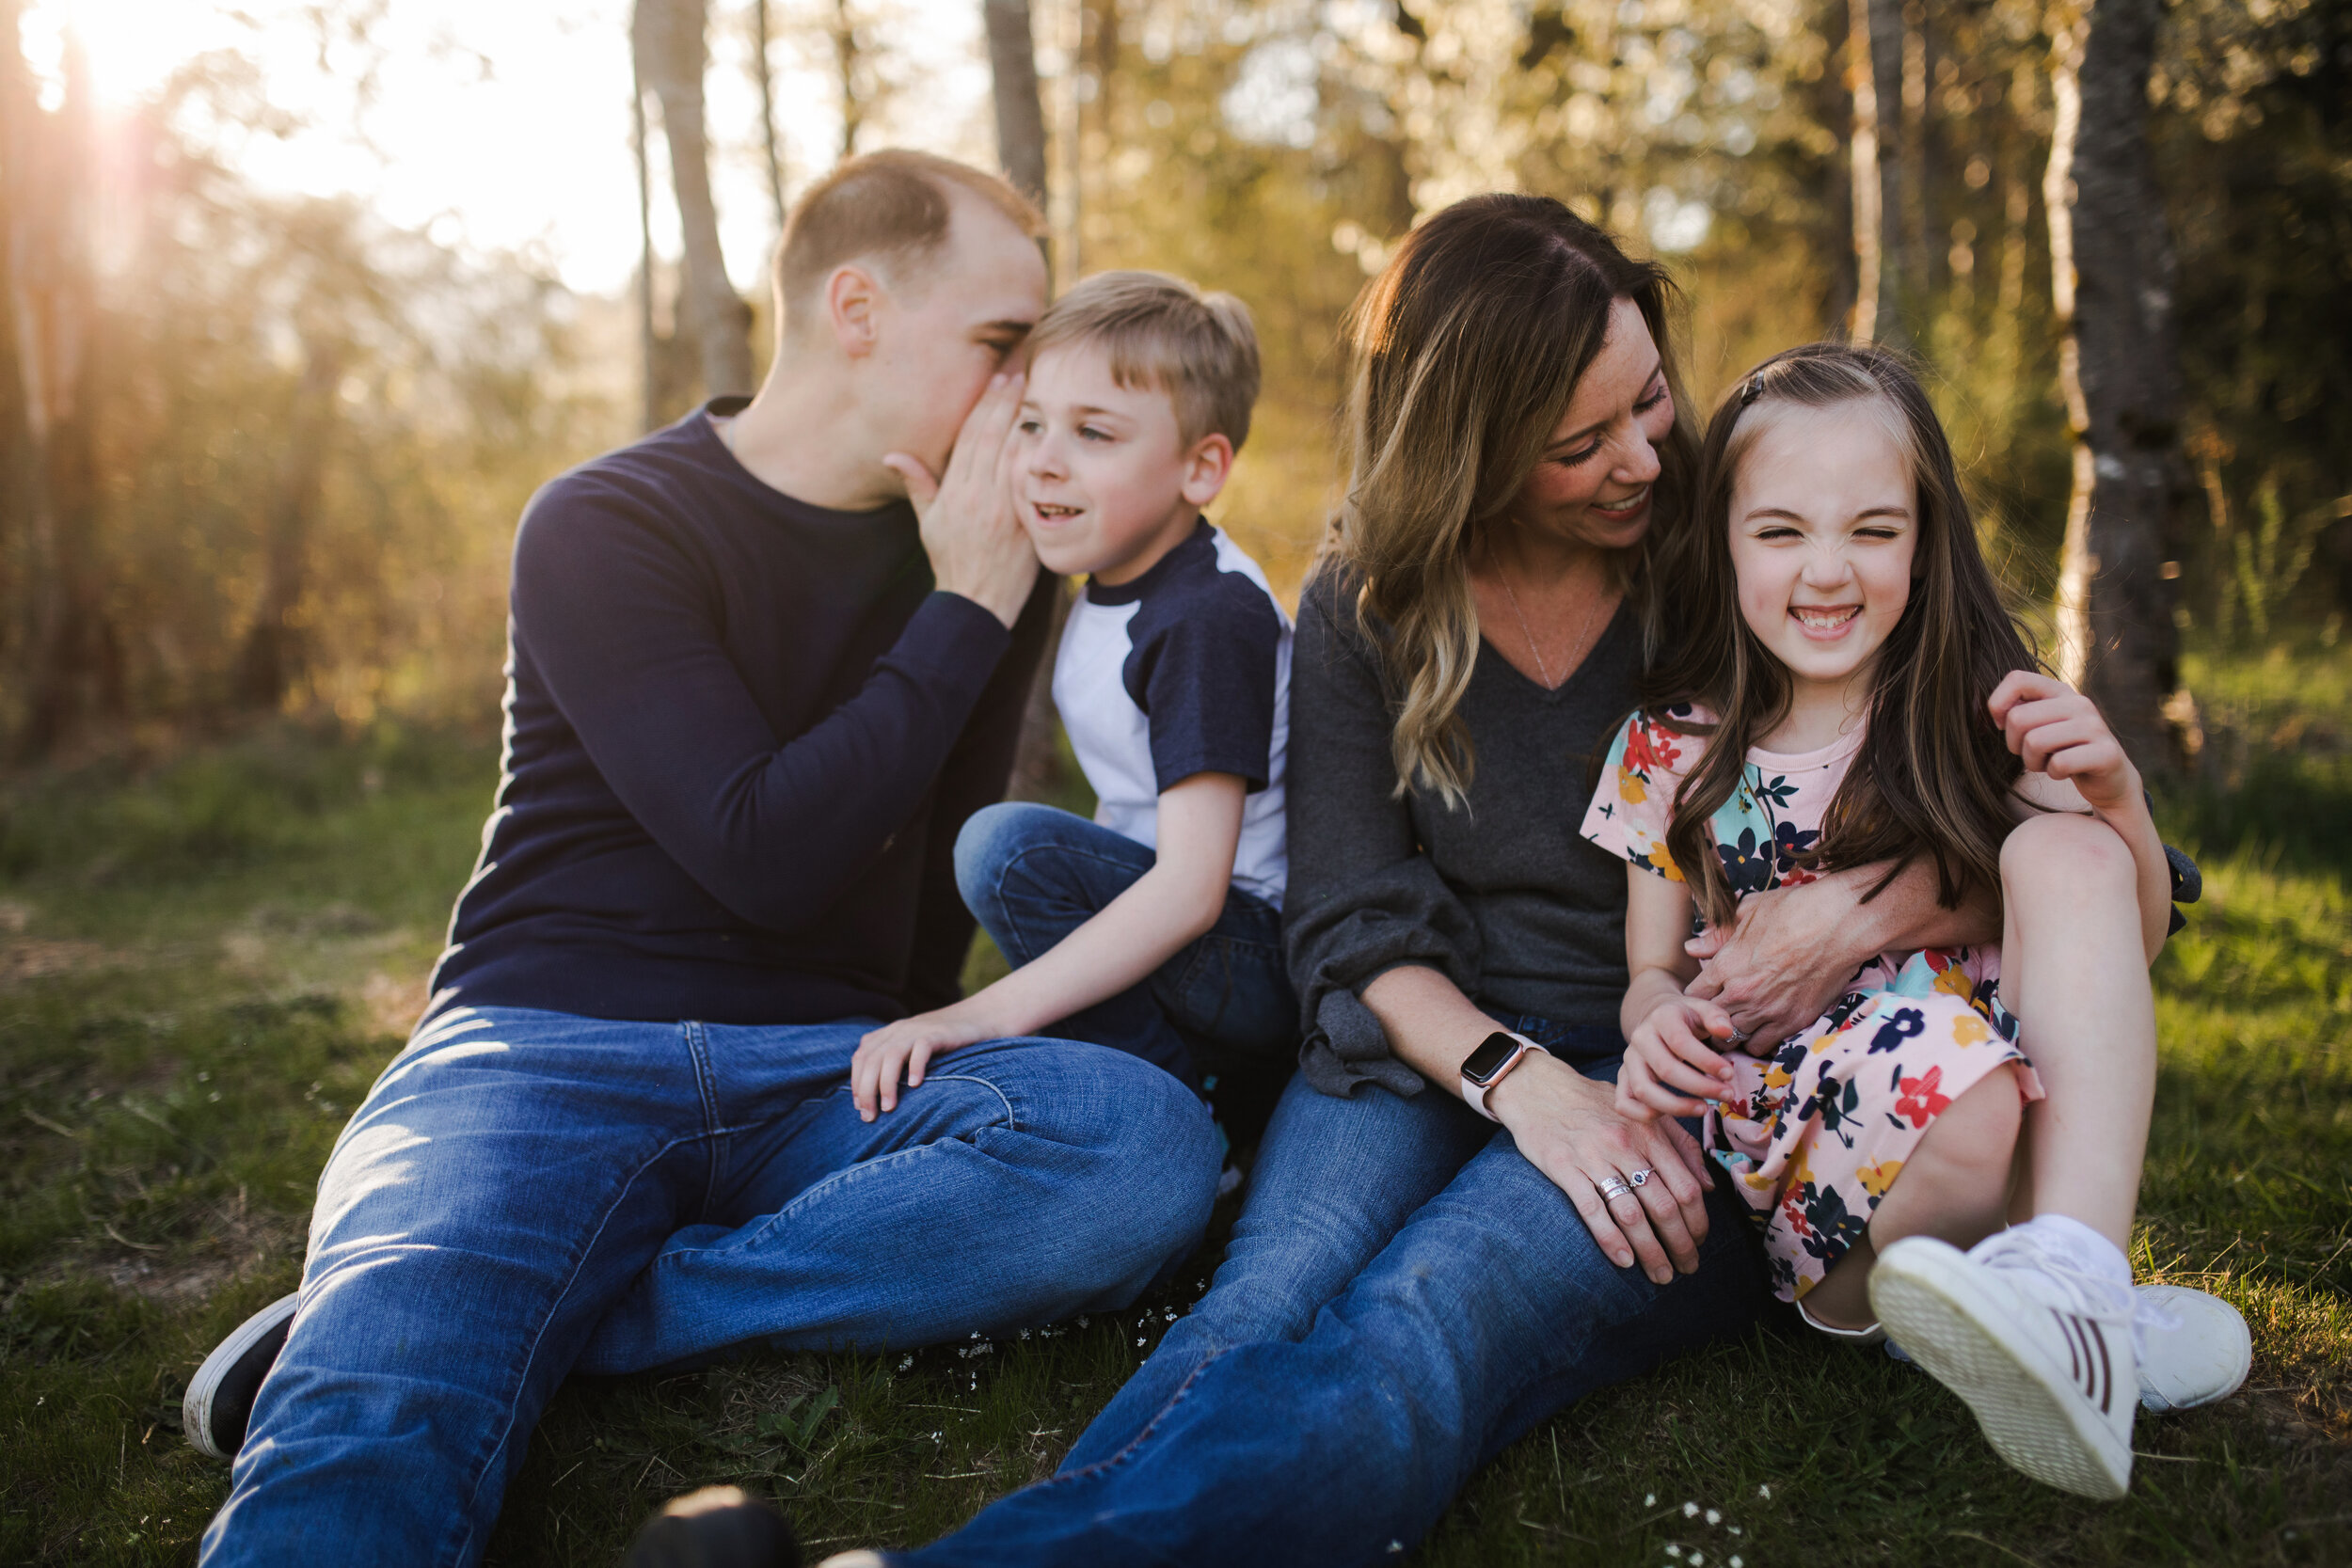 Why Outdoor Family Photo Sessions Take Place 1 Hr Before Sunset |  Issaquah Family Photographer